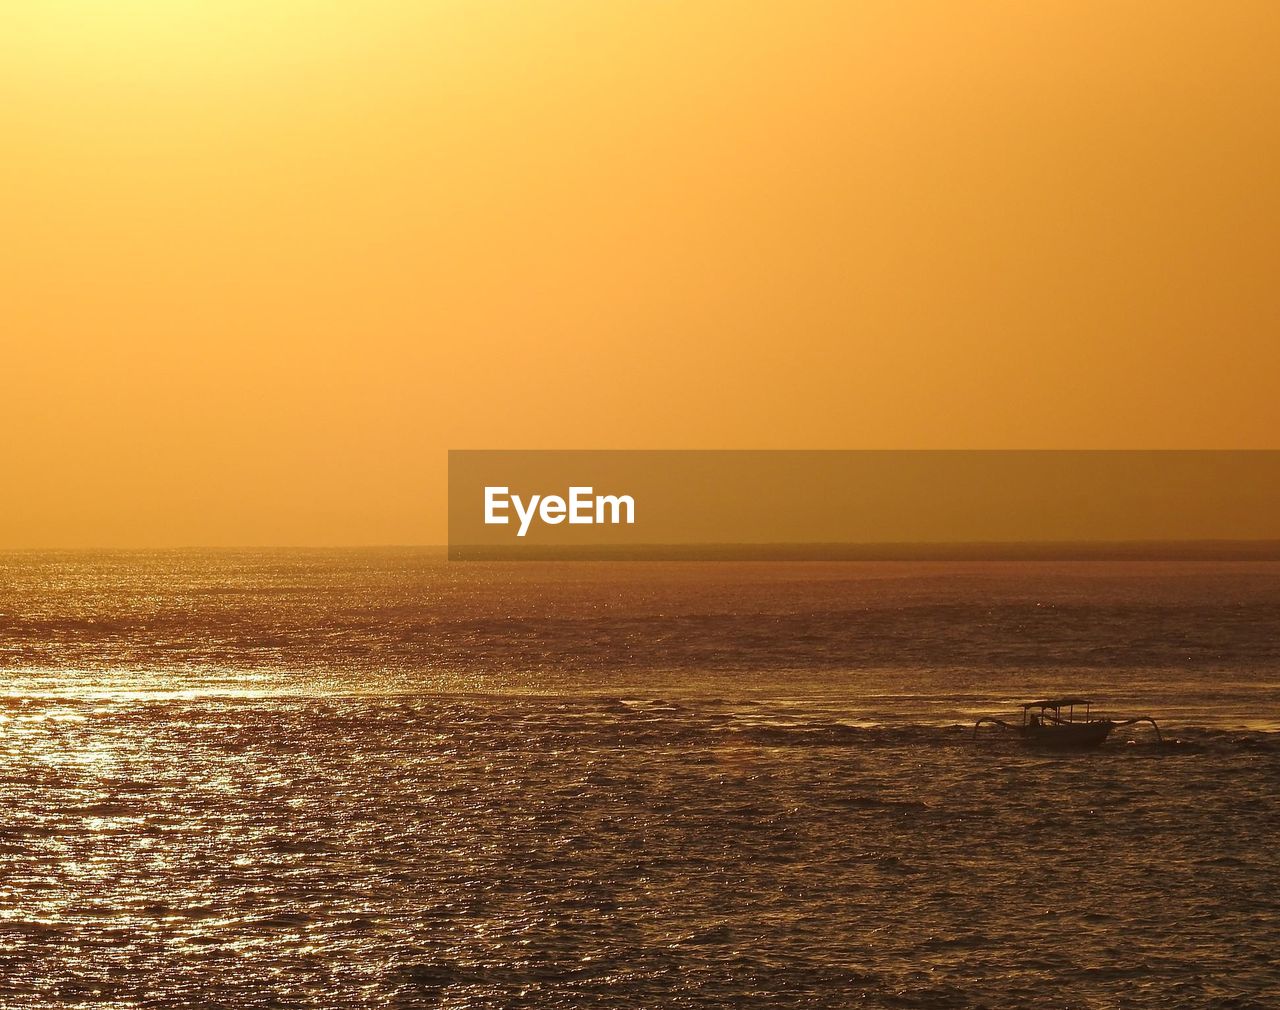 SCENIC VIEW OF SEA AGAINST CLEAR SKY DURING SUNSET